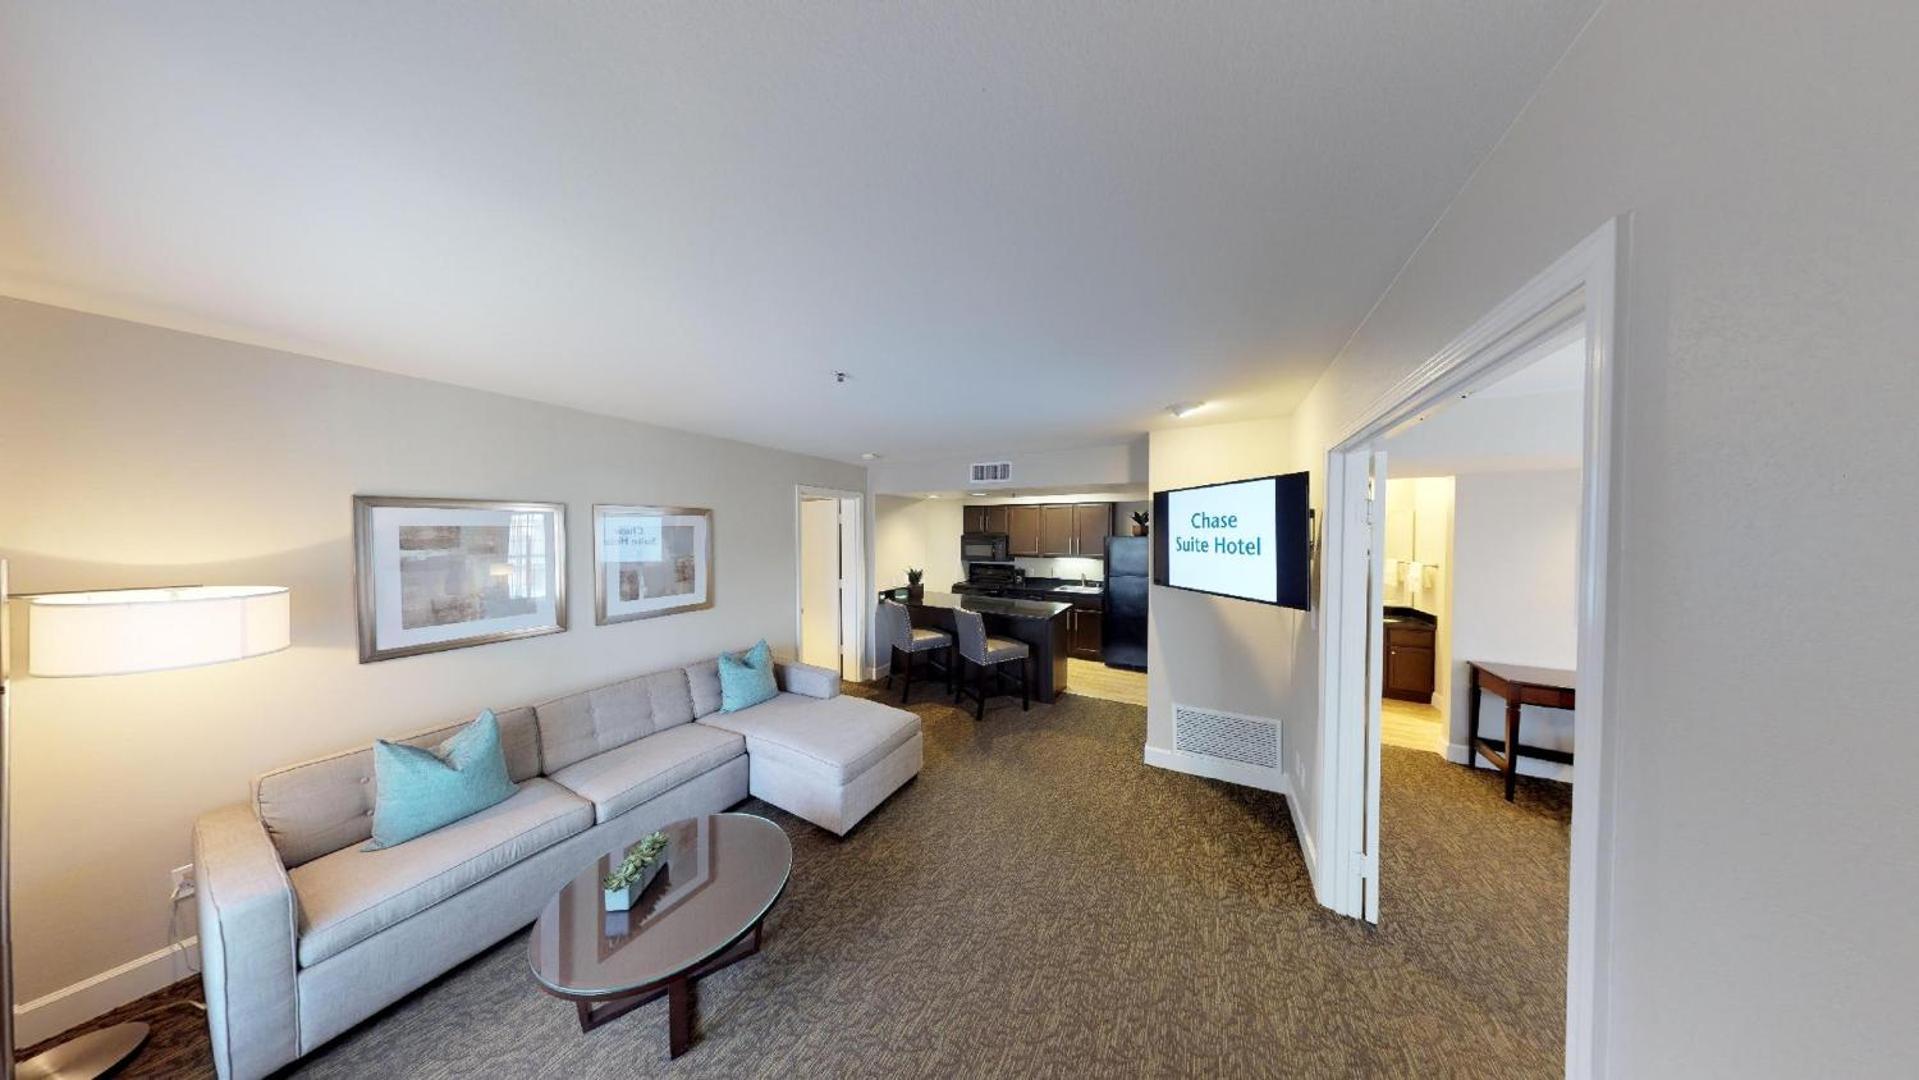 Chase Suite Hotel Brea